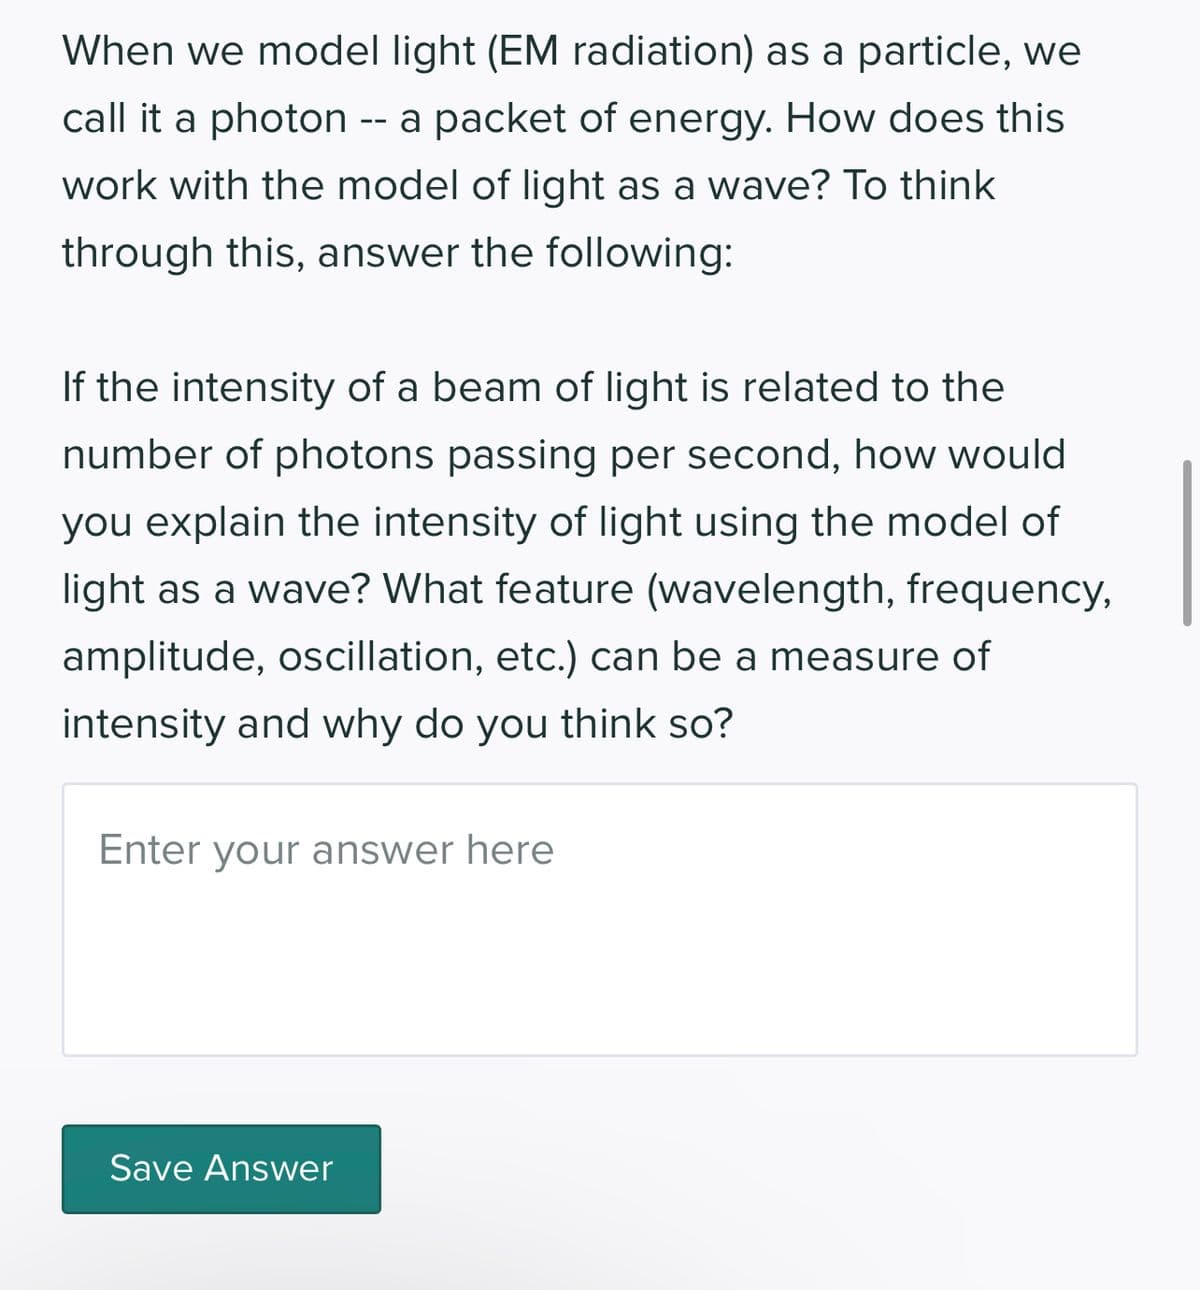 When we model light (EM radiation) as a particle, we
call it a photon -- a packet of energy. How does this
work with the model of light as a wave? To think
through this, answer the following:
If the intensity of a beam of light is related to the
number of photons passing per second, how would
you explain the intensity of light using the model of
light as a wave? What feature (wavelength, frequency,
amplitude, oscillation, etc.) can be a measure of
intensity and why do you think so?
Enter your answer here
Save Answer